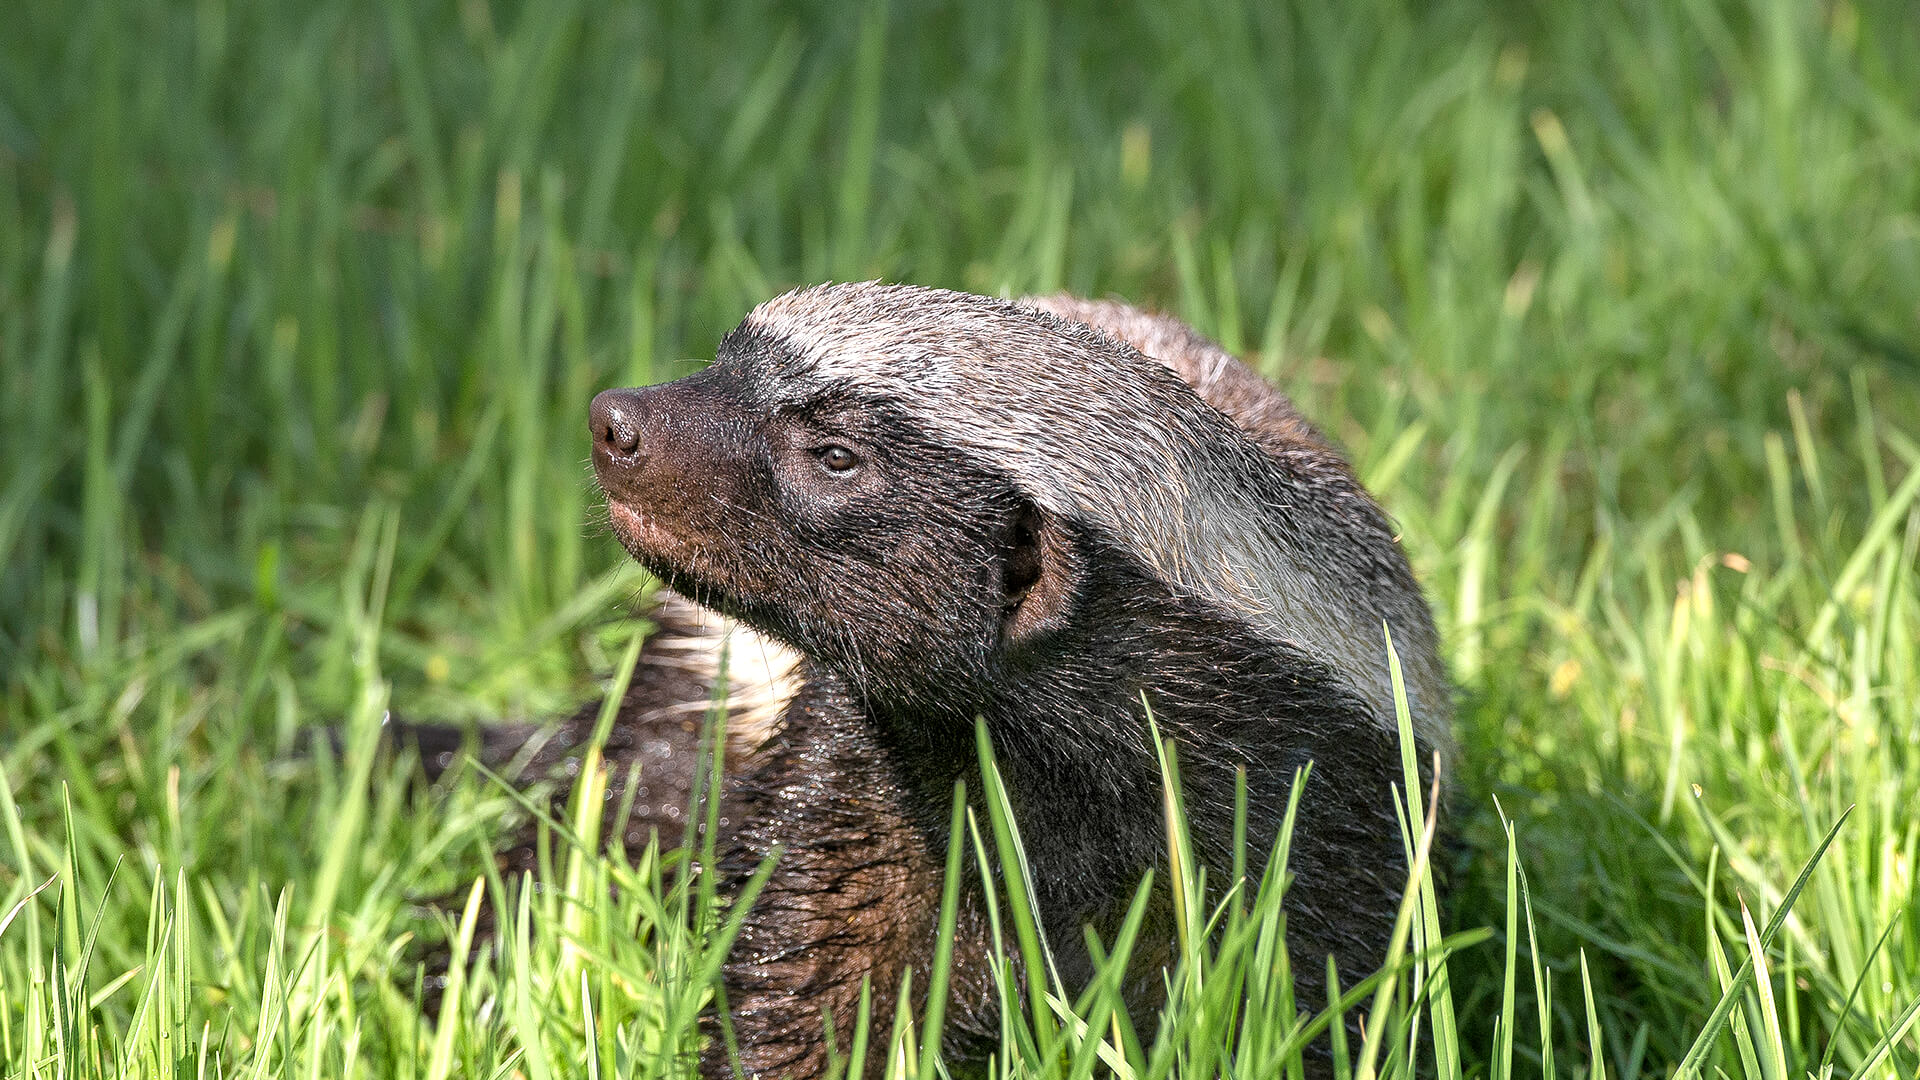 A young honey badger looks to the left as he sits in tall blades of grass.